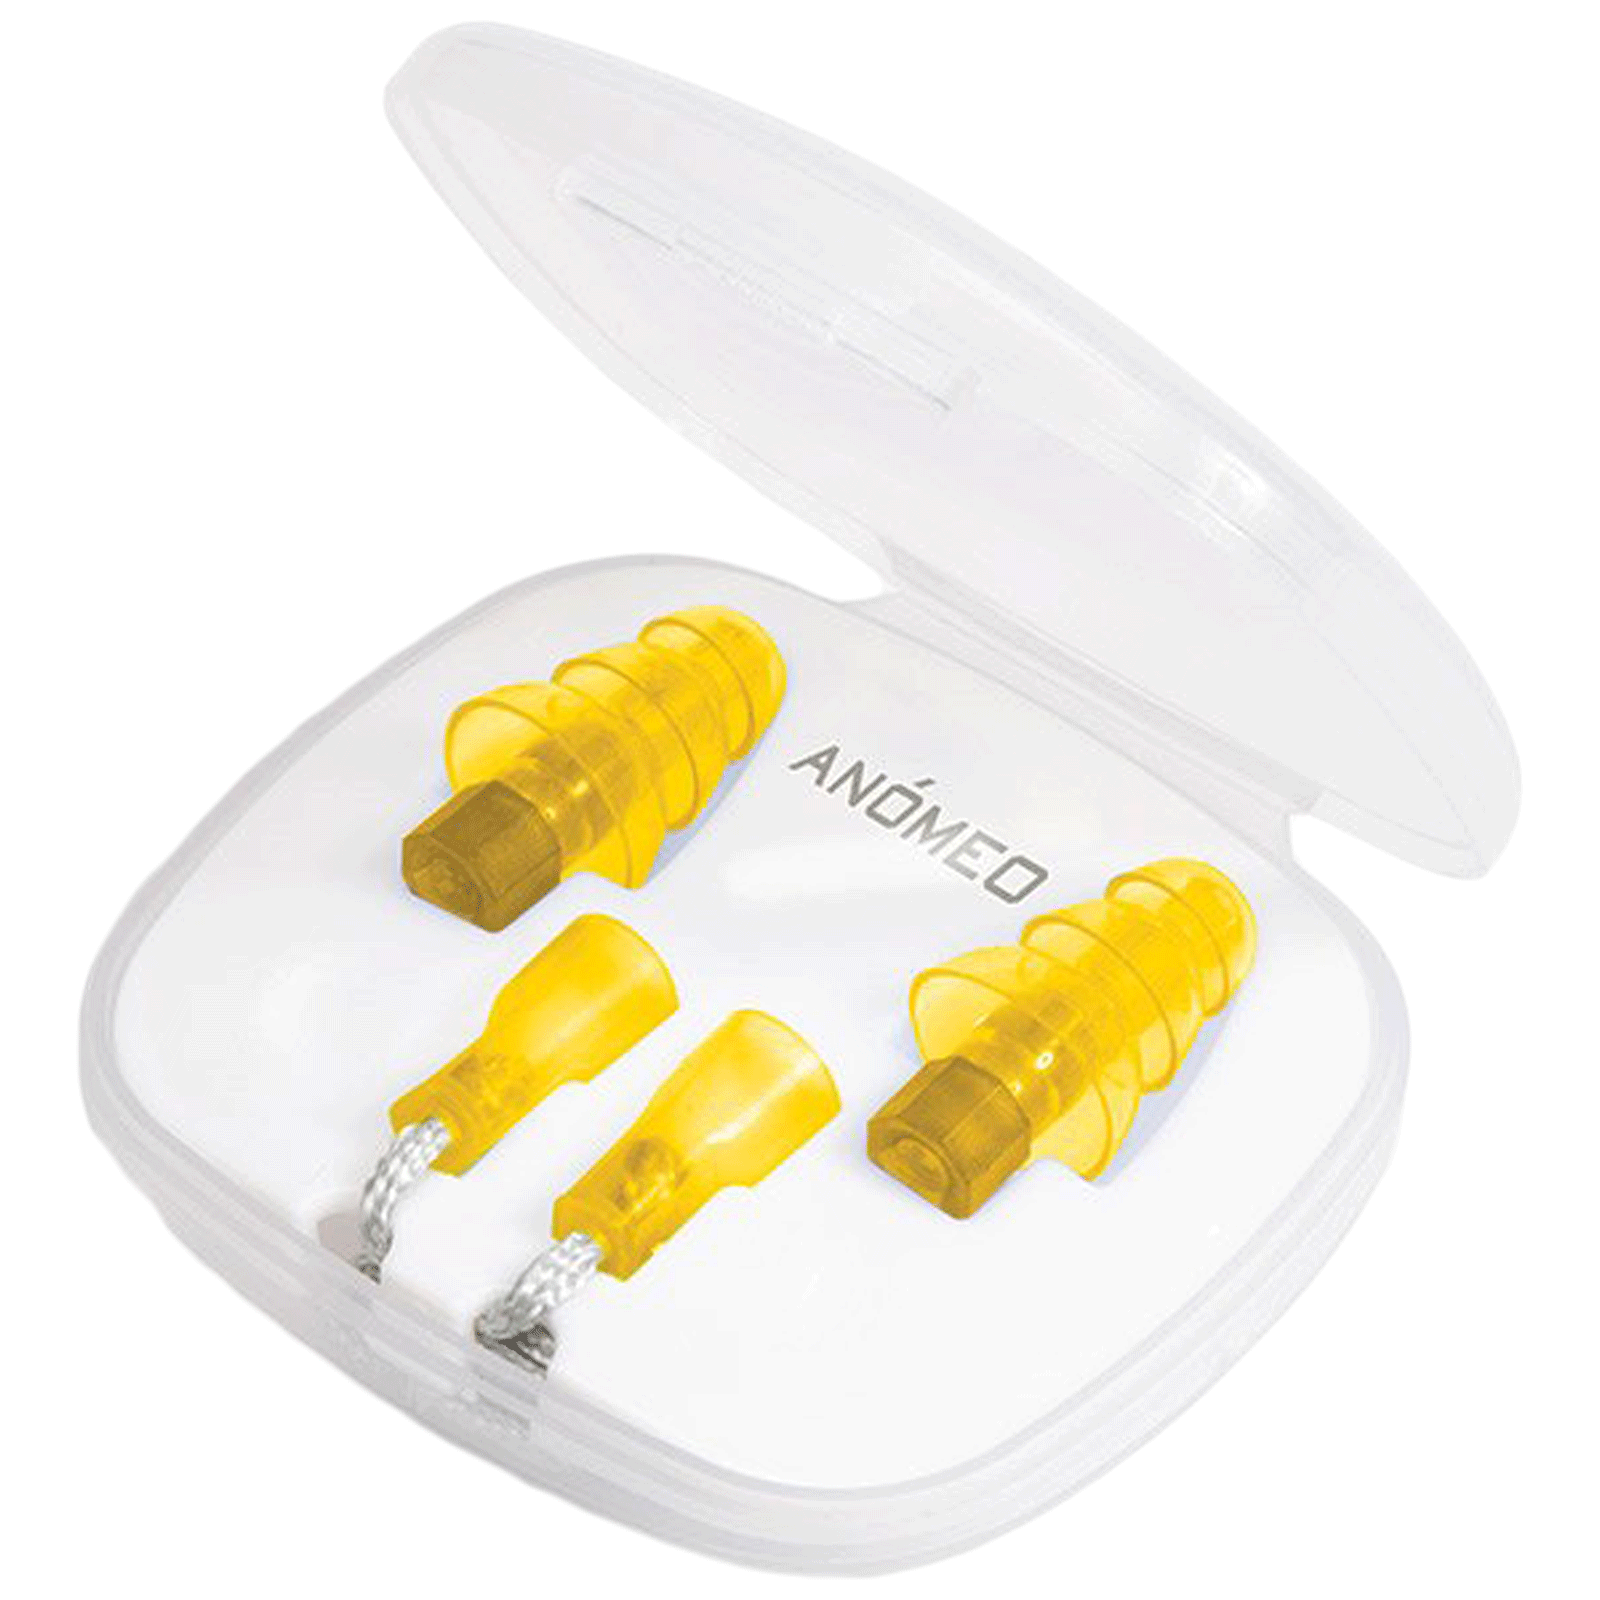 ANOMEO Professional Silicone and Polypropylene Earplugs (Cut Out Excess Sound,2427, Yellow)